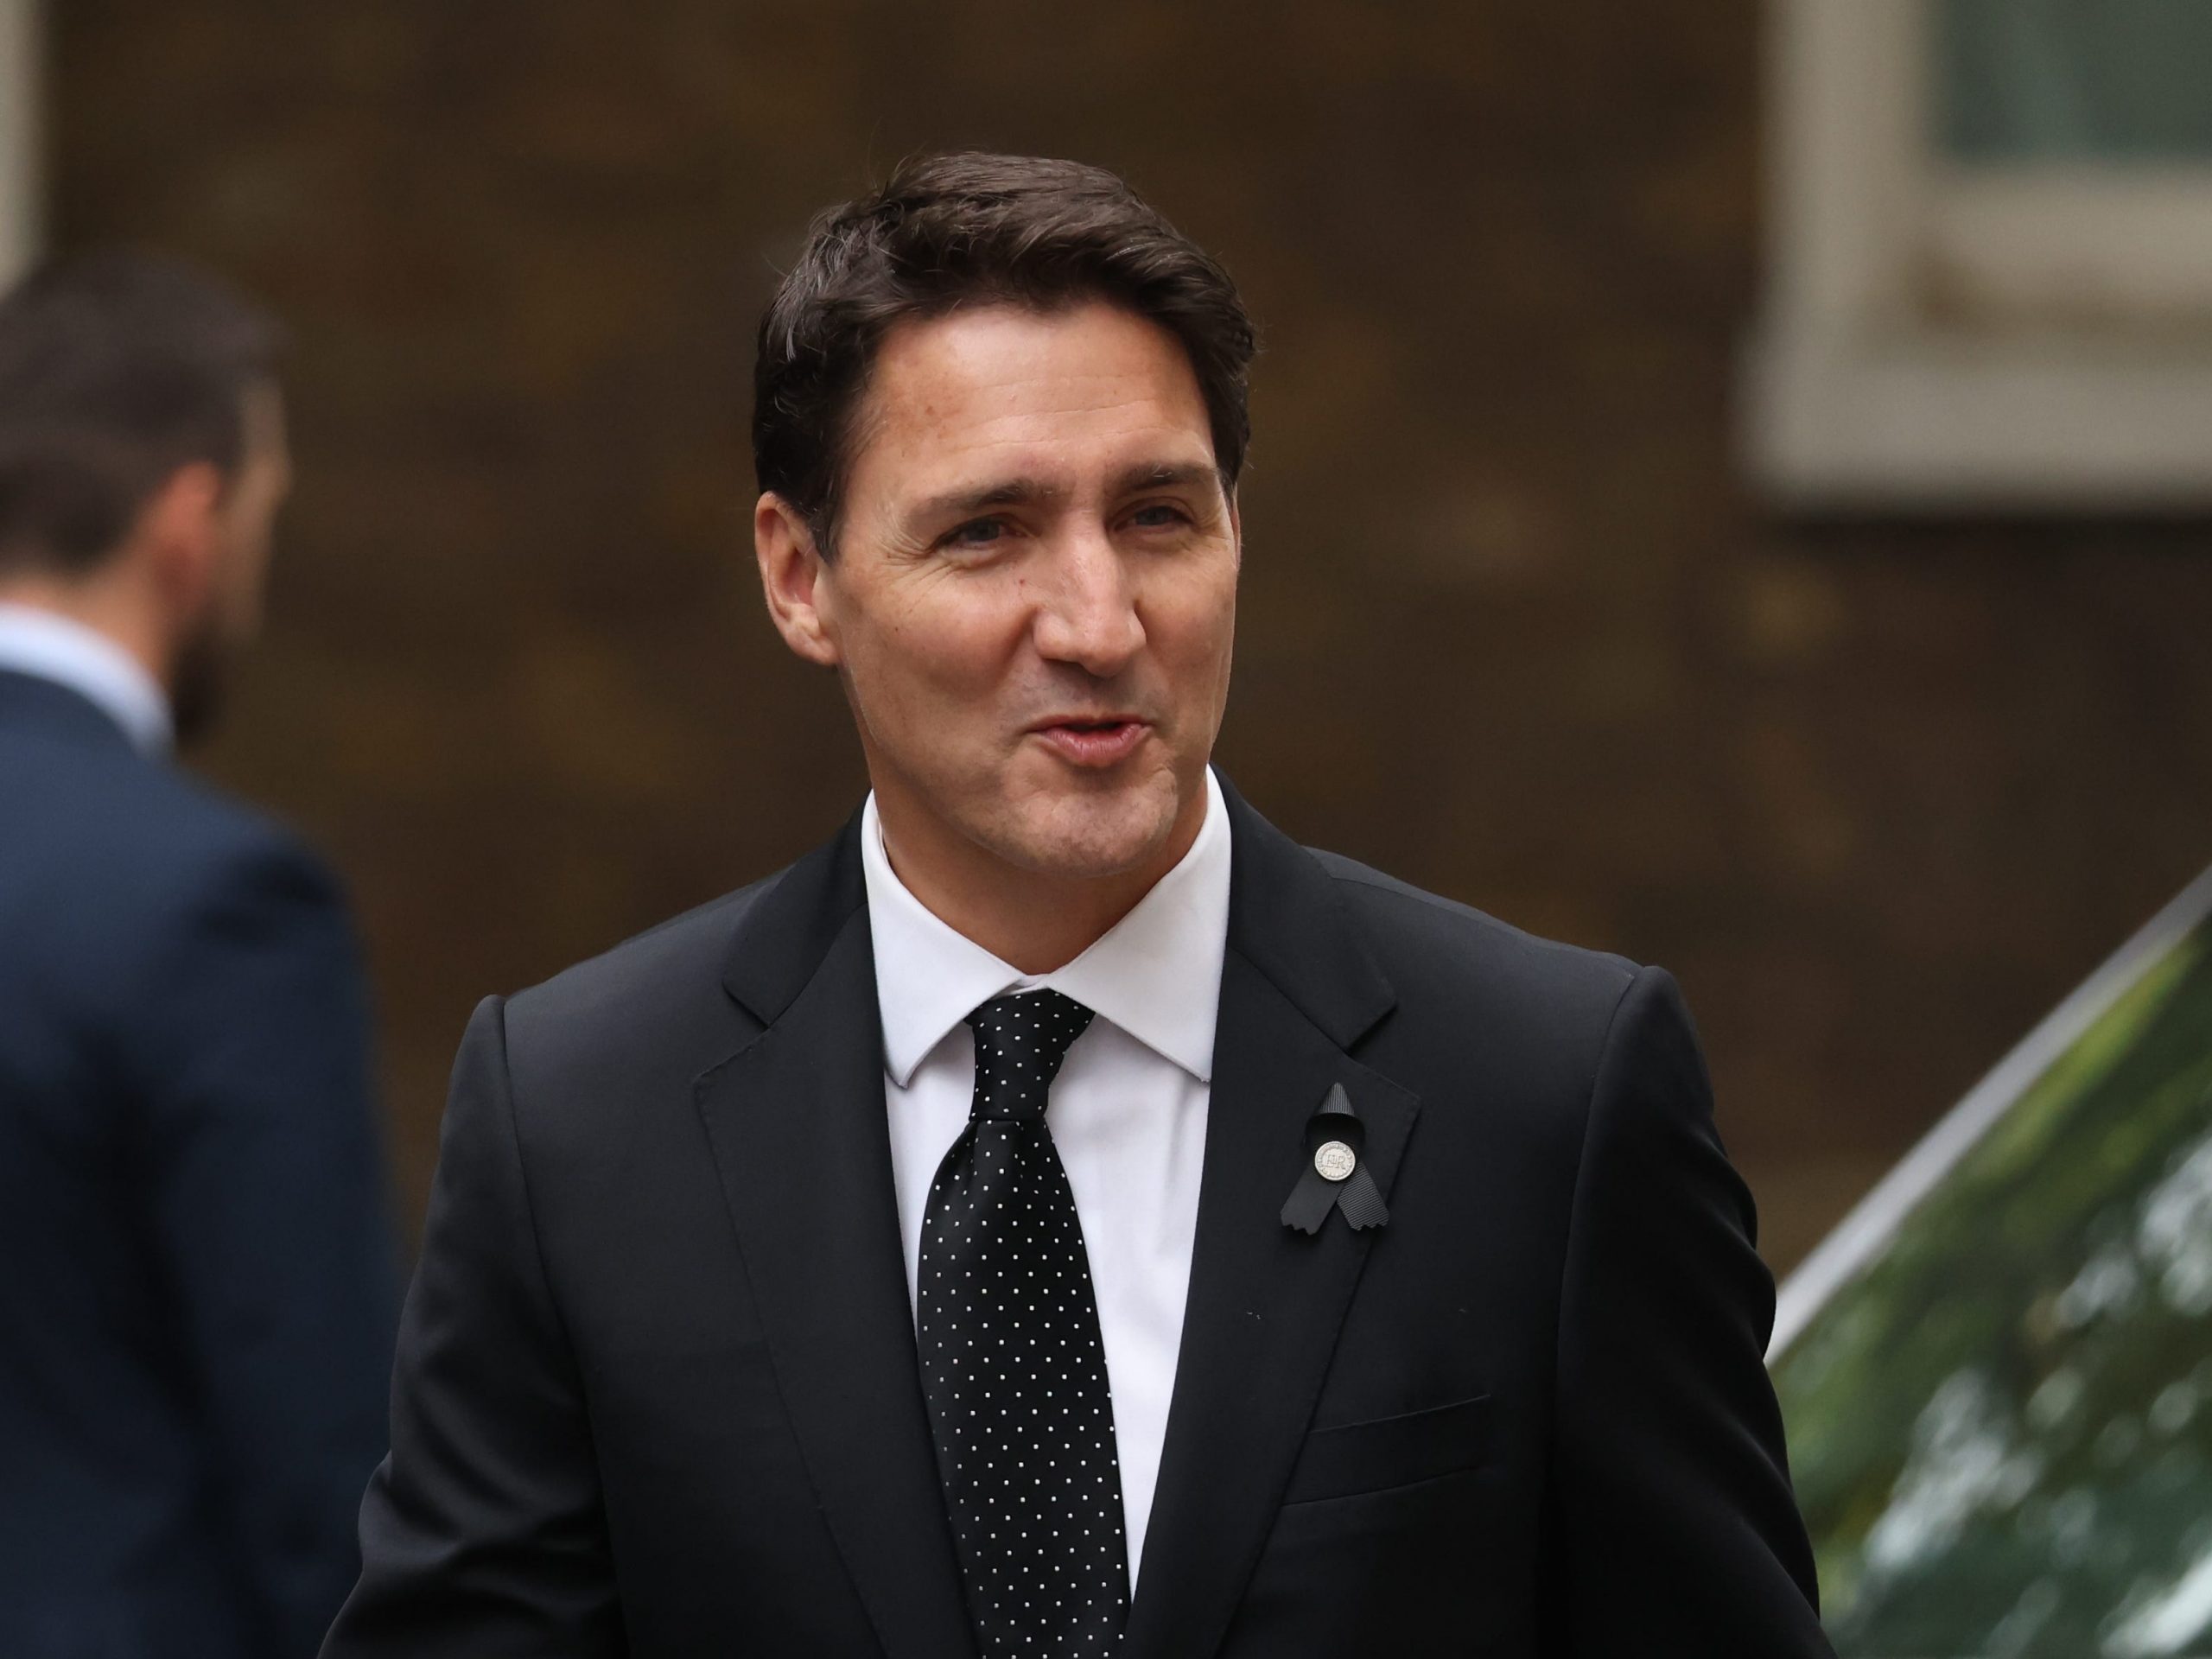 LONDON, ENGLAND - SEPTEMBER 18: Canadian Prime Minister, Justin Trudeau, arrives at 10 Downing Street to meet the British Prime Minister Liz Truss on September 18, 2022 in London, England. Foreign dignitaries, heads of state and other VIPs are arriving in London prior to the funeral of Queen Elizabeth II on Monday. The 96-year-old monarch died at Balmoral Castle in Scotland on September 8, 2022, and is succeeded by her eldest son, King Charles III (Photo by Hollie Adams/Getty Images)